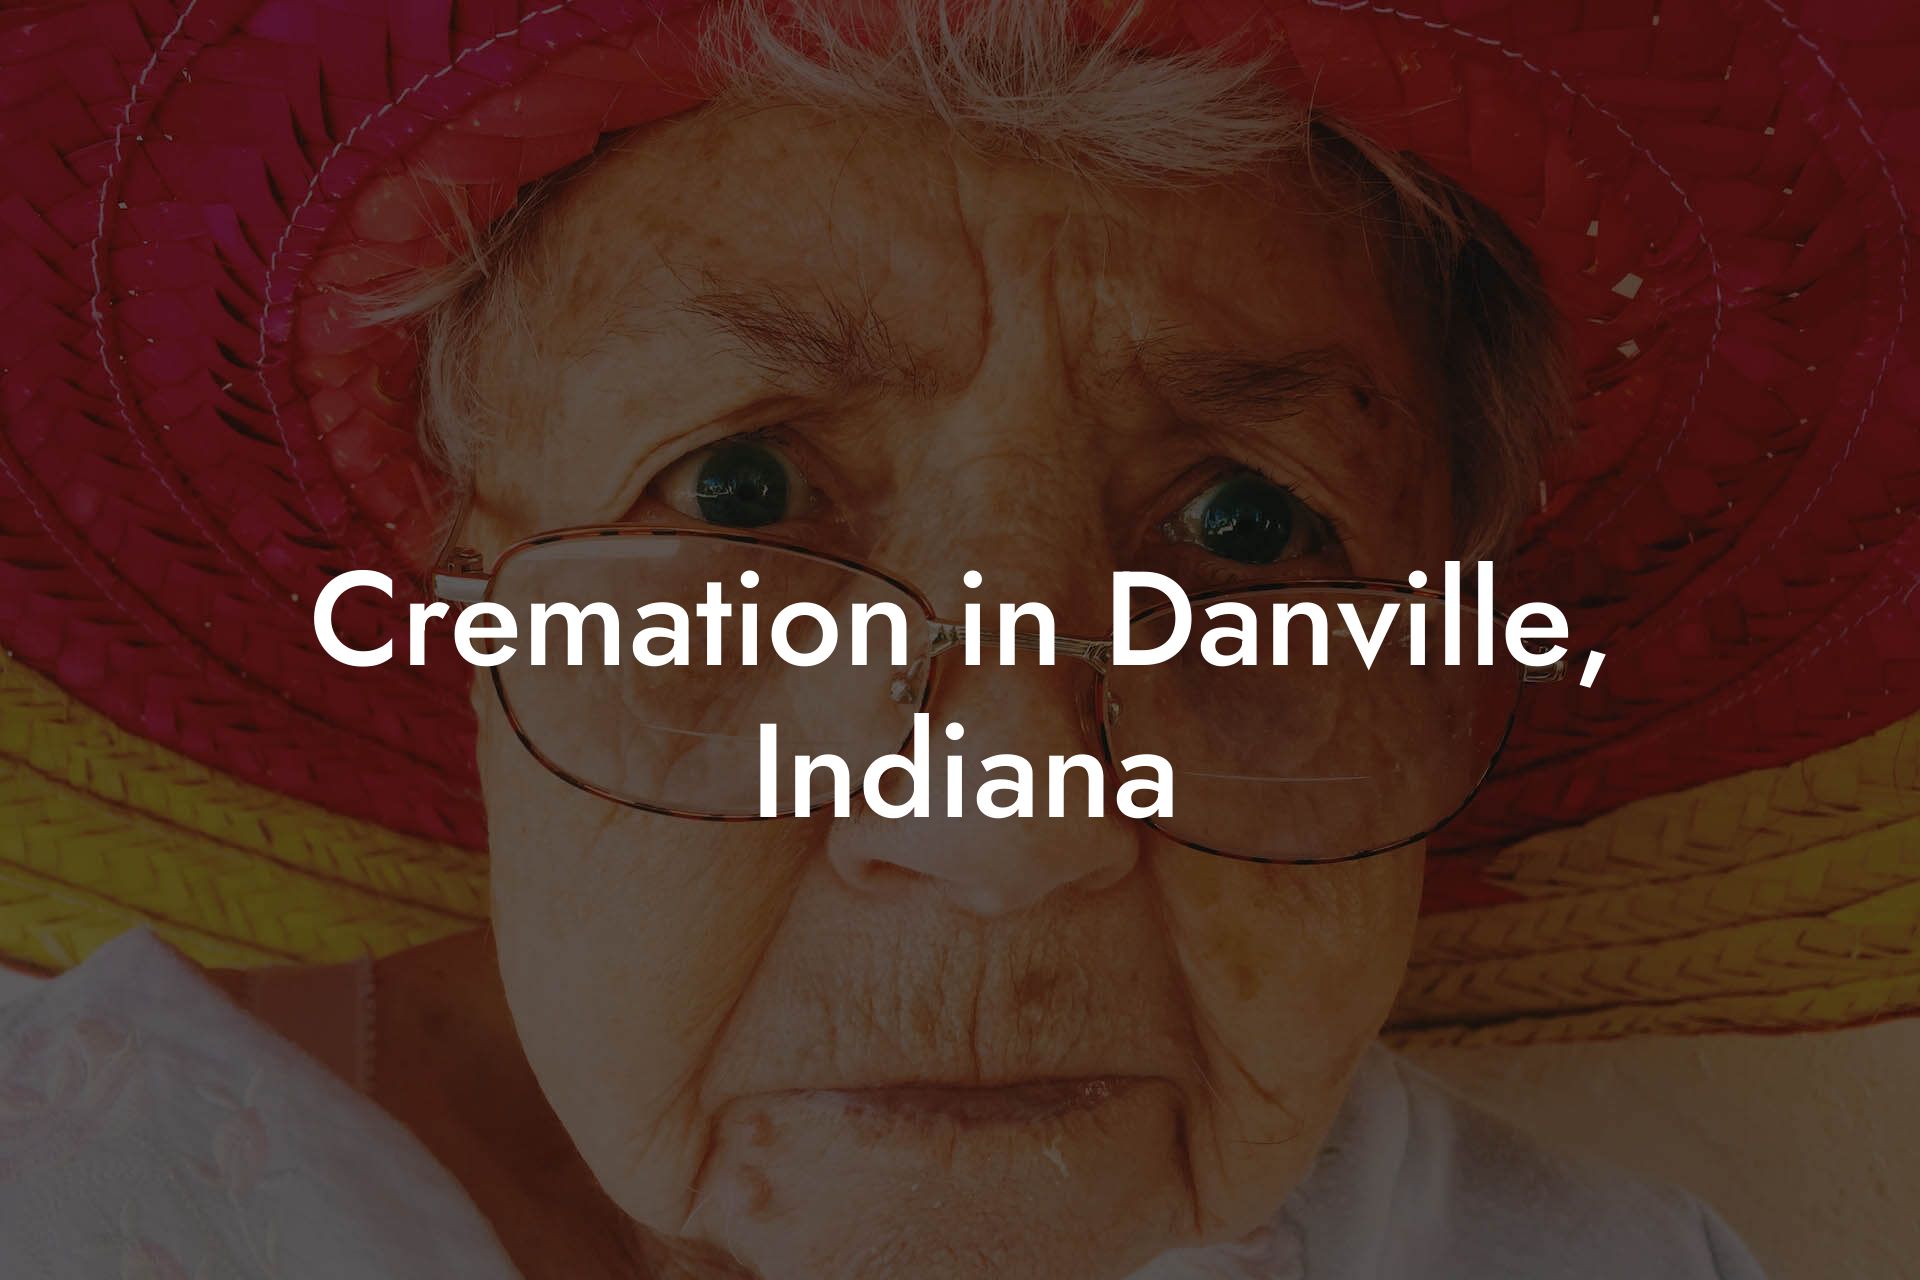 Cremation in Danville, Indiana